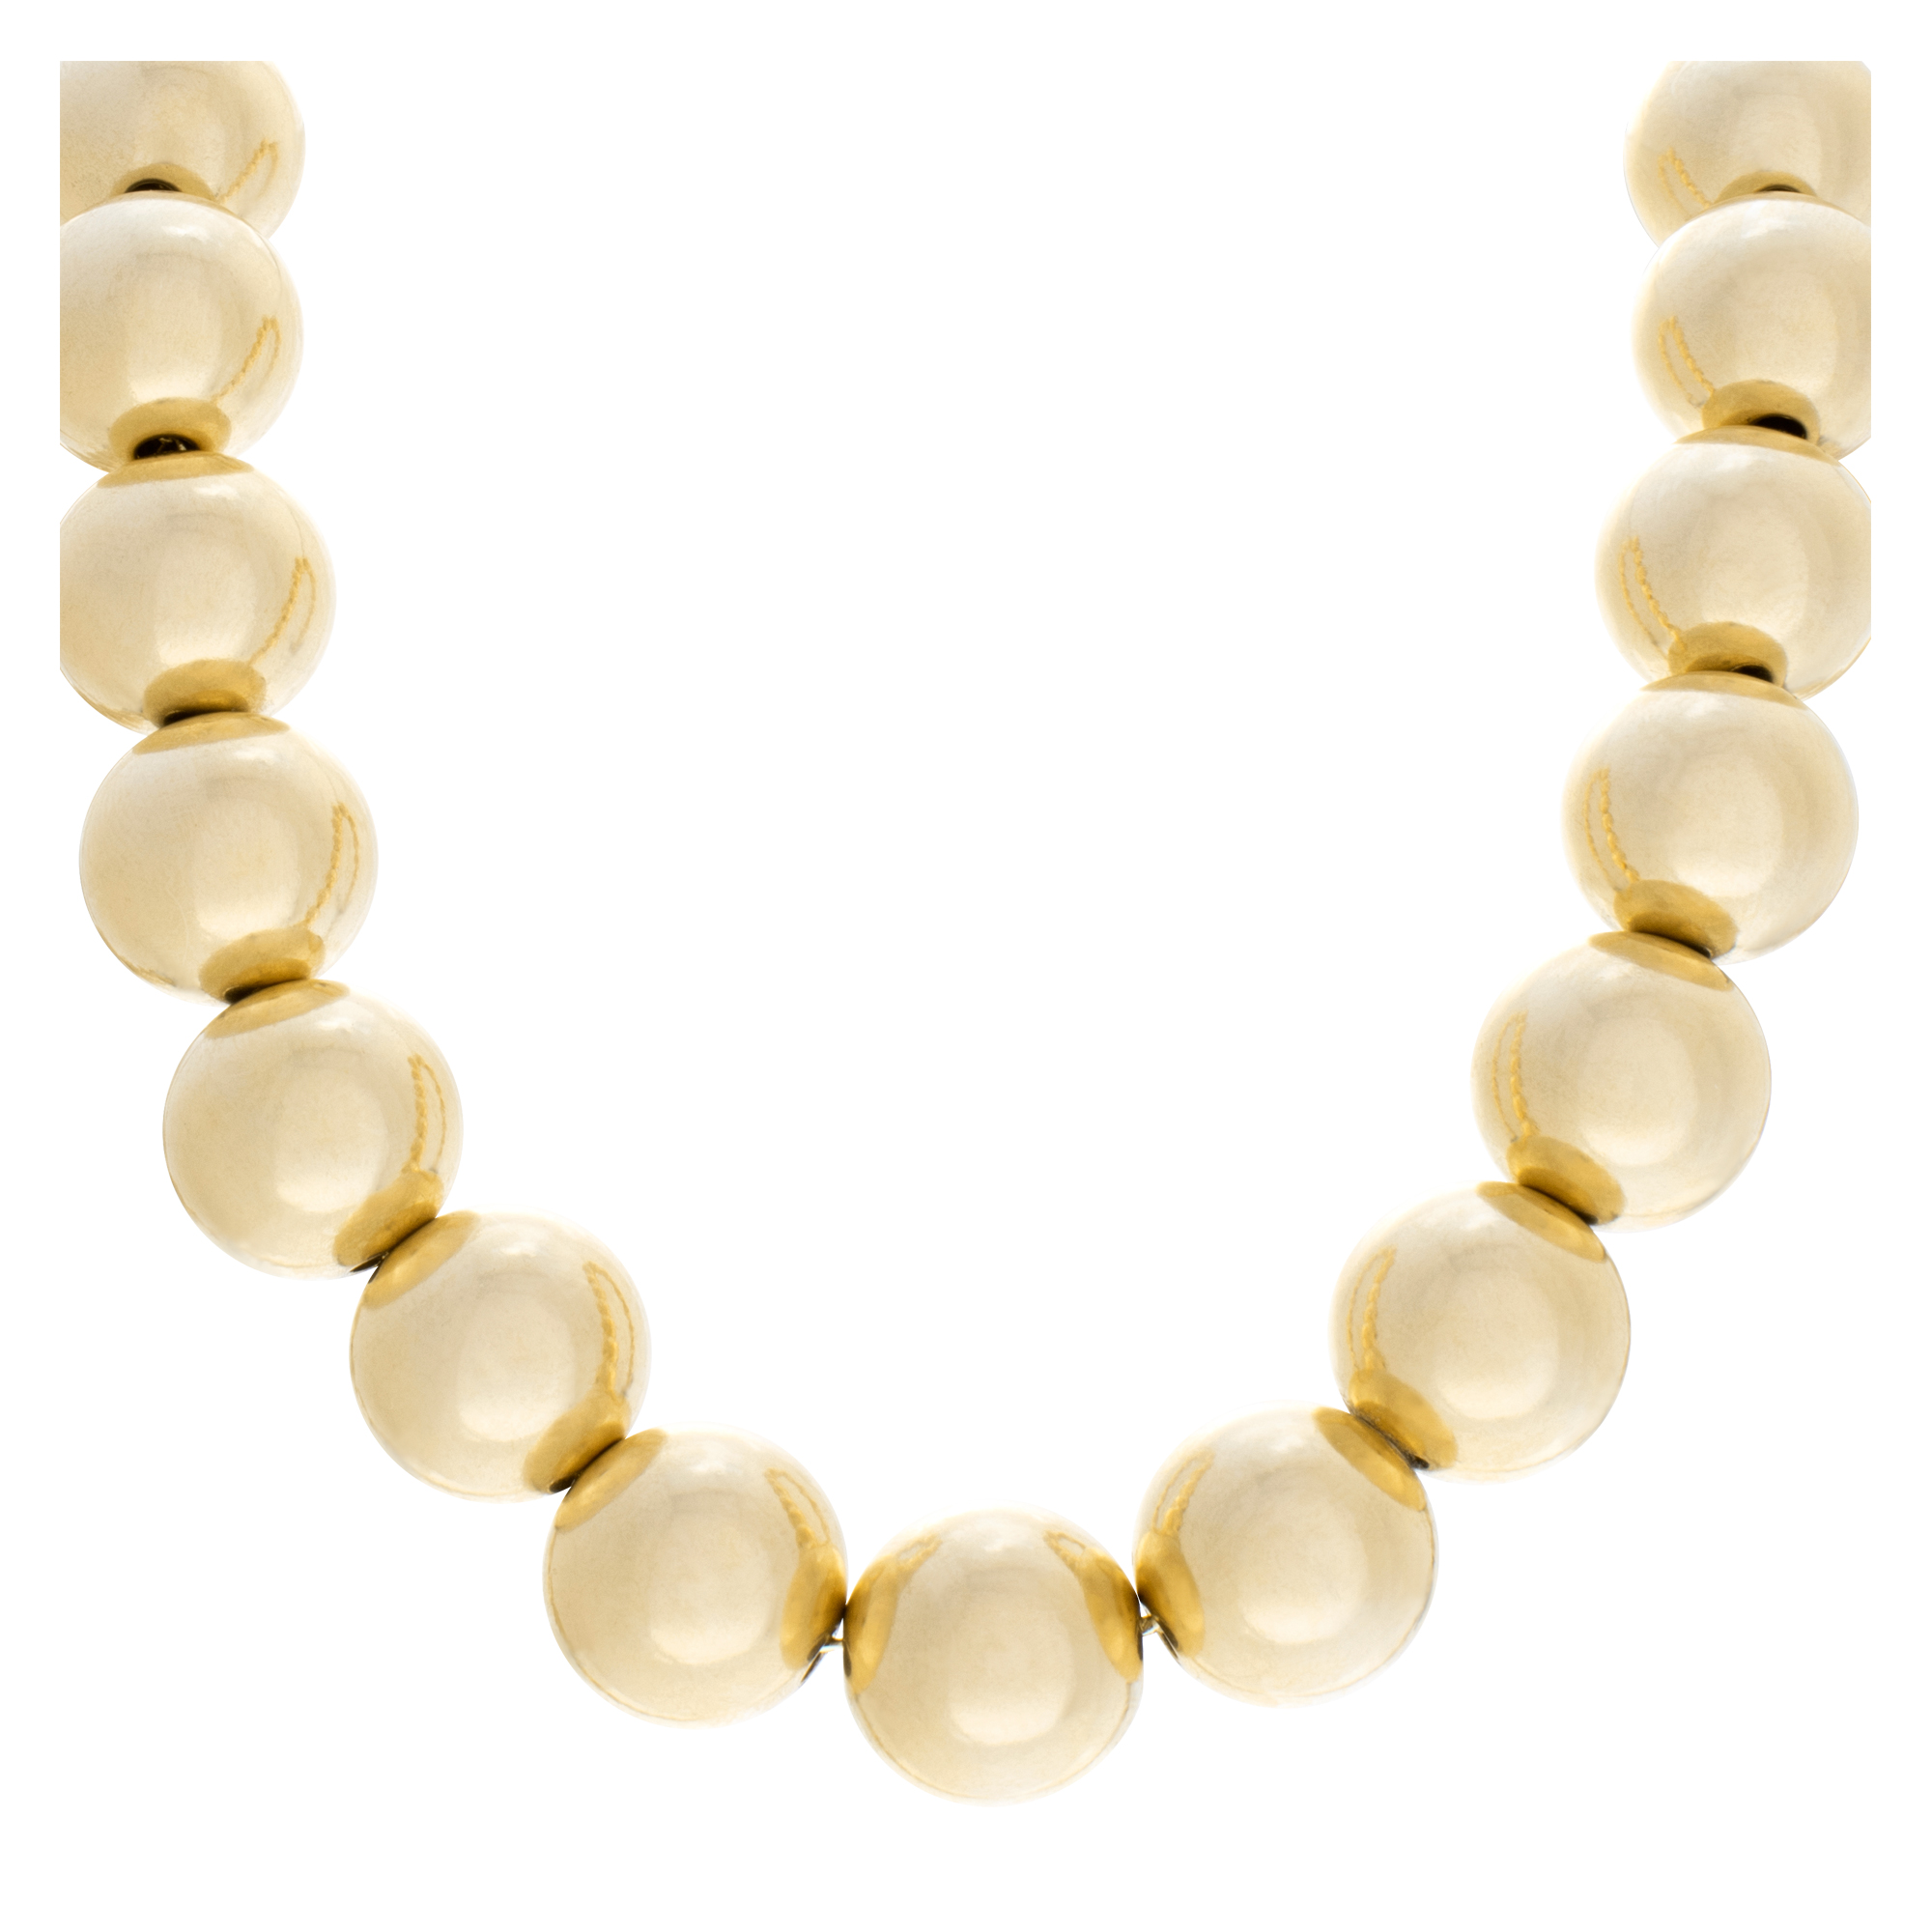 Classic Elegant Necklace With 12 X 12.5 Mm 14k Yellow Gold Beads. 24" Long. image 1